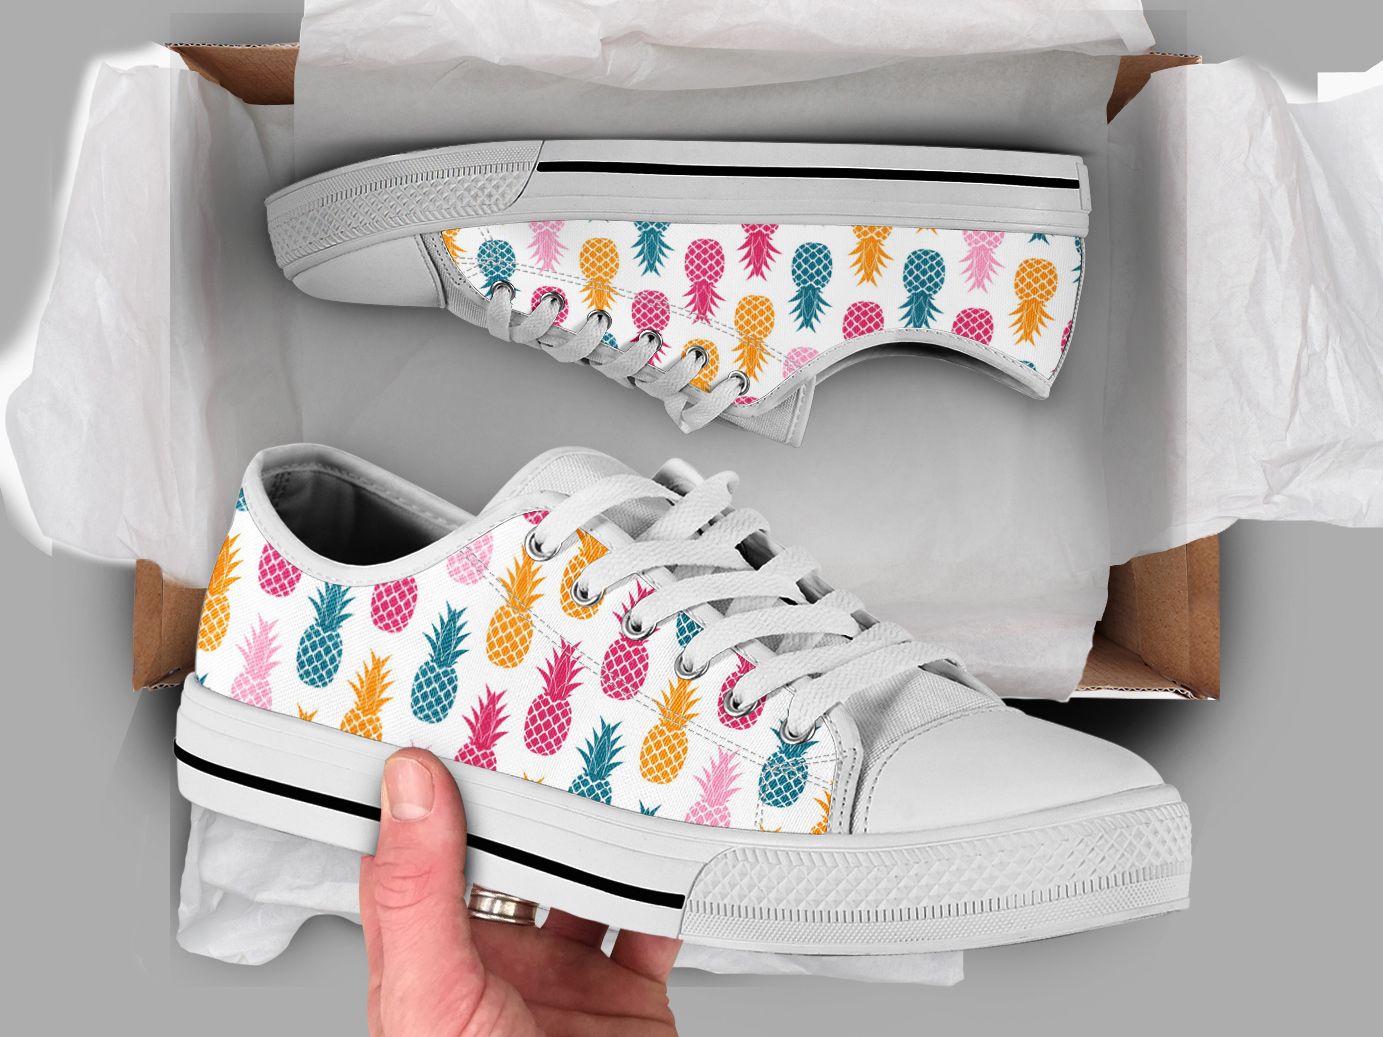 Cool Pinapple Shoes | Custom Low Tops Sneakers For Kids & Adults